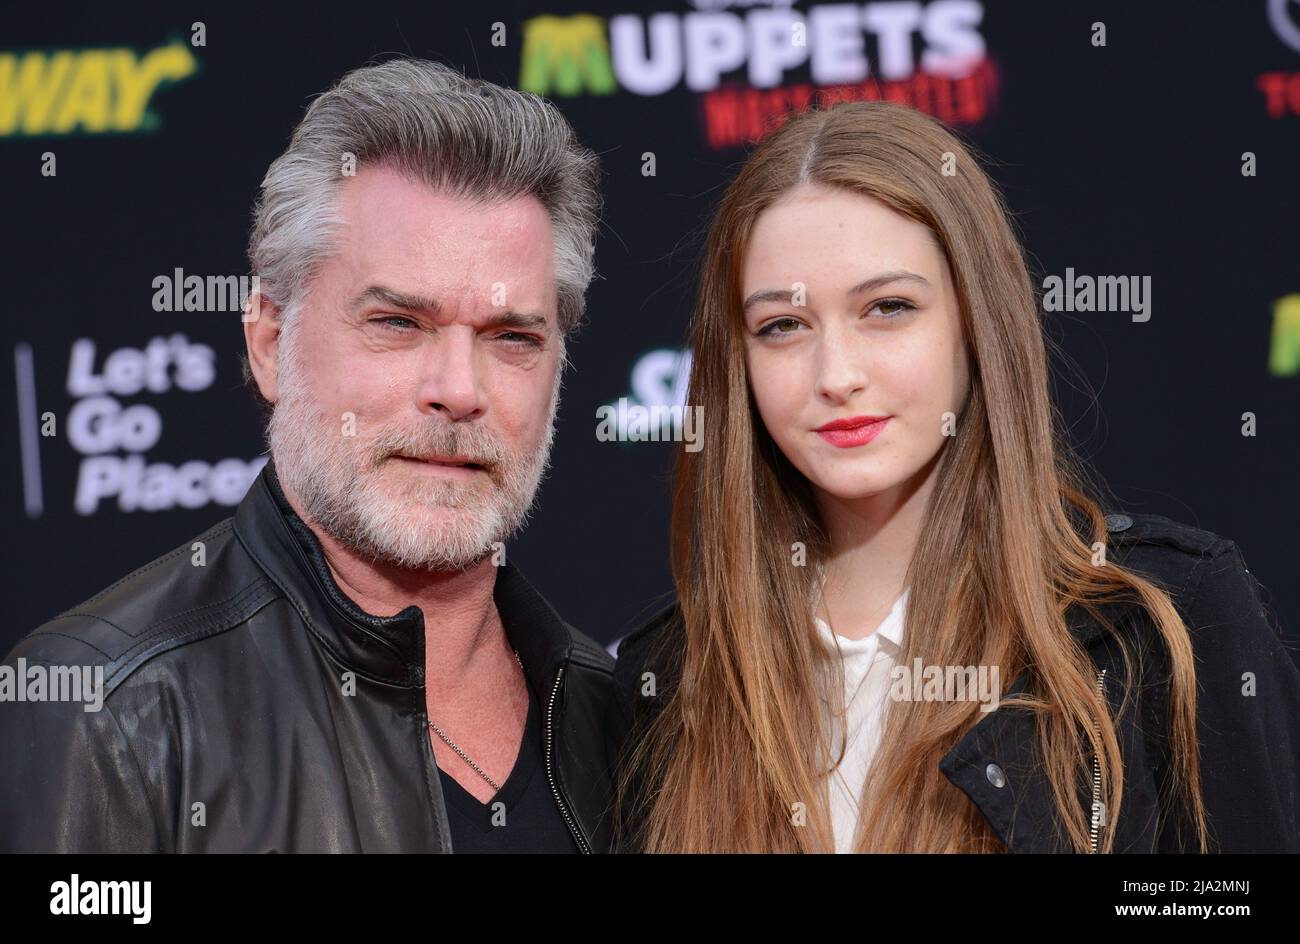 Los Angeles, USA. 11th Mar, 2014. Ray Liotta and daughter Karsen Liotta arriving at the Muppets Most Wanted Premiere at the El Capitan Theatre in Los Angeles.Ray Liotta and daughter Karsen Liotta 078 Ray Liotta, the actor best known for playing mobster has died. He was 67. Credit: Tsuni/USA/Alamy Live News Stock Photo